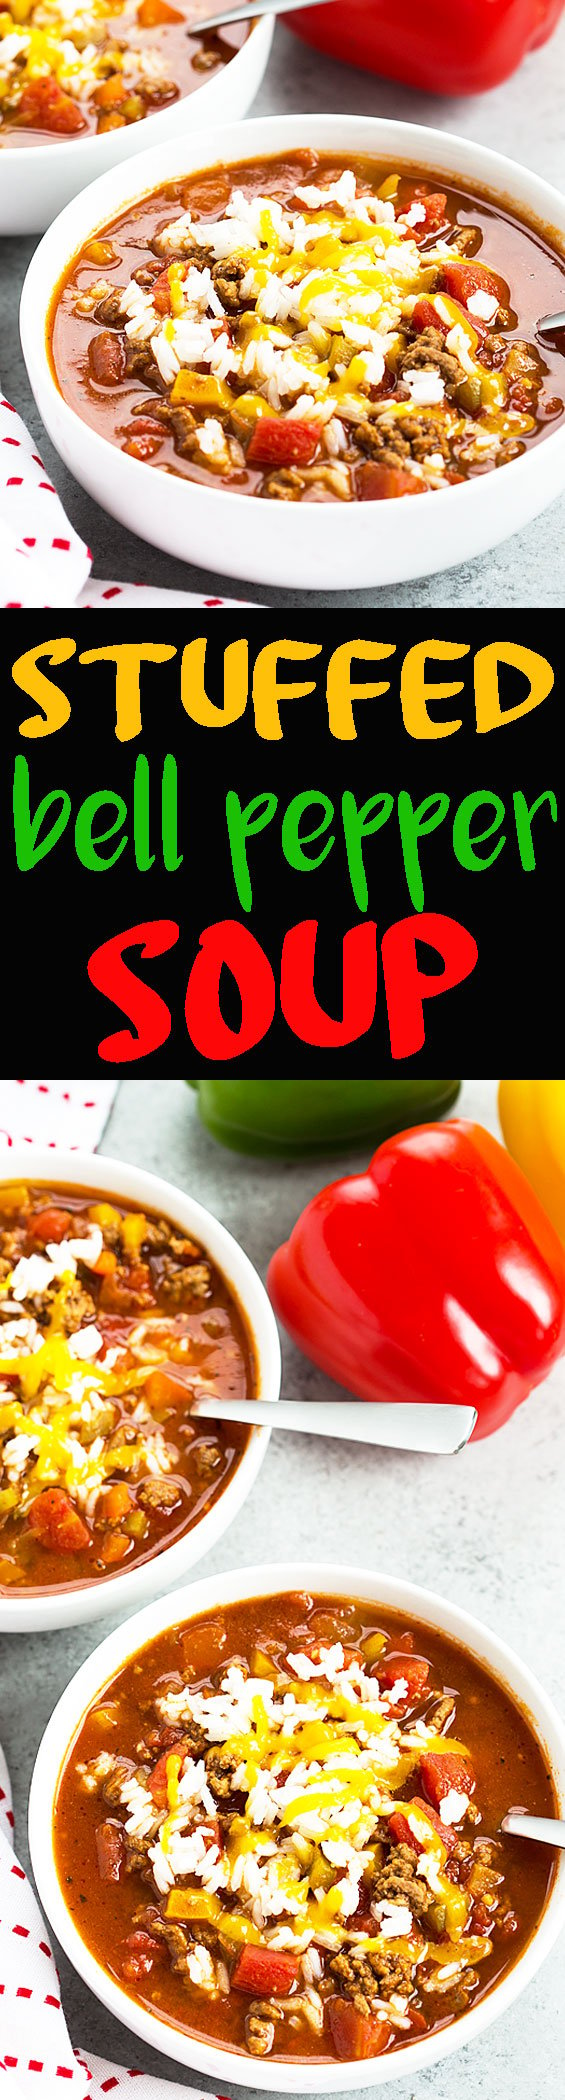 A two image vertical collage of stuffed bell pepper soup with overlay text in the center.